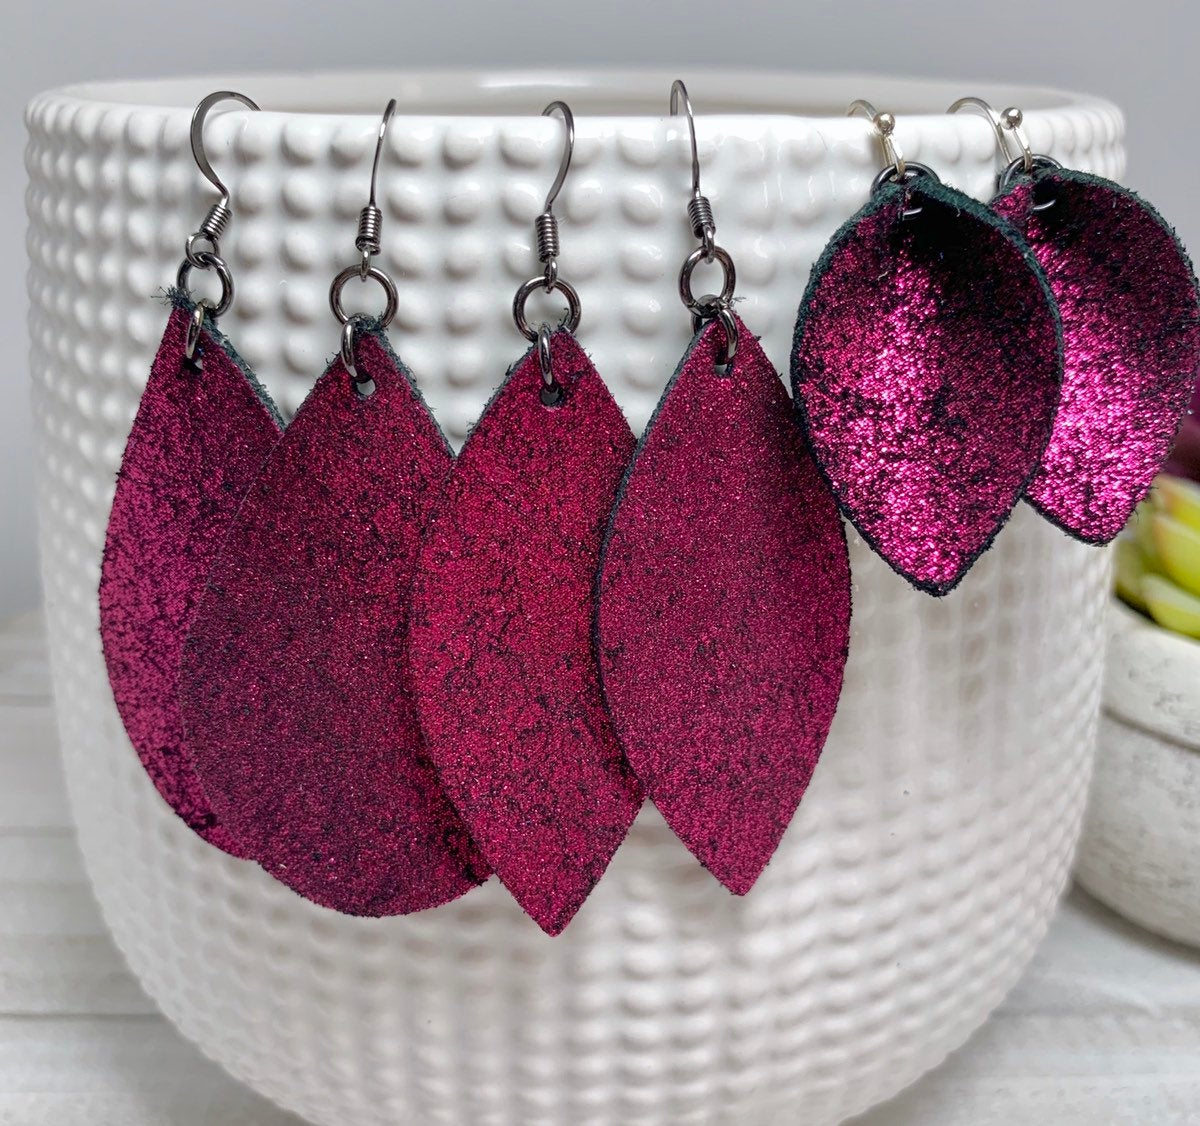 Clearance* Glitter Leather Earrings | Leather Earrings | Leather Earrings Teardrop | Metallic Leather Earrings | Genuine Leather | Pink Leat